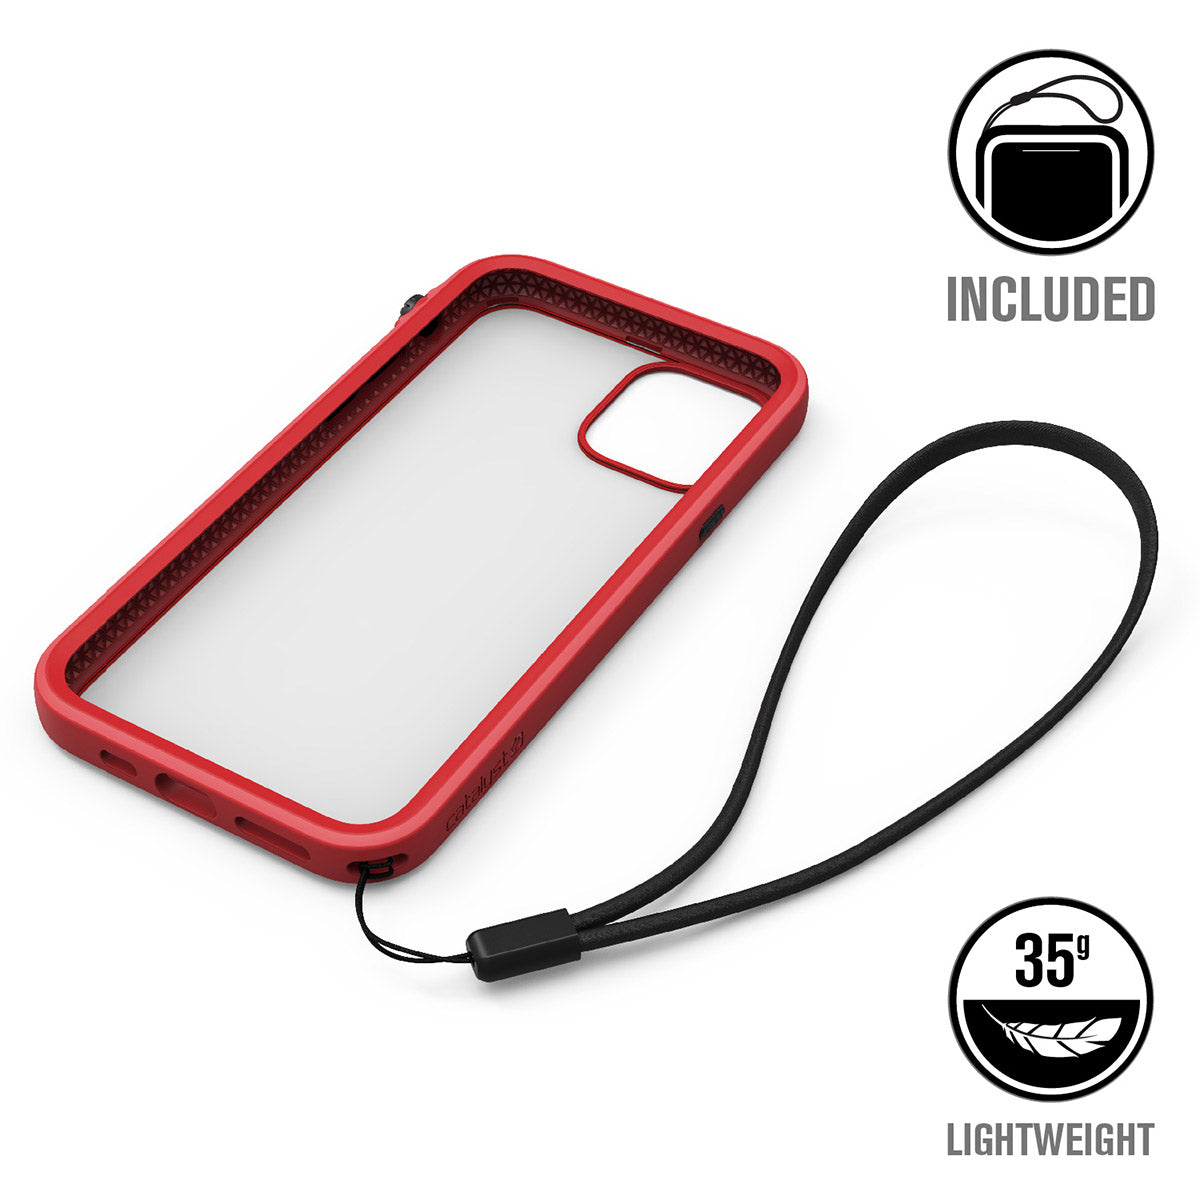 catalyst iPhone 11 series impact protection case empty flame red case for iPhone 11 pro with a lanyard text reads included 35g lightweight